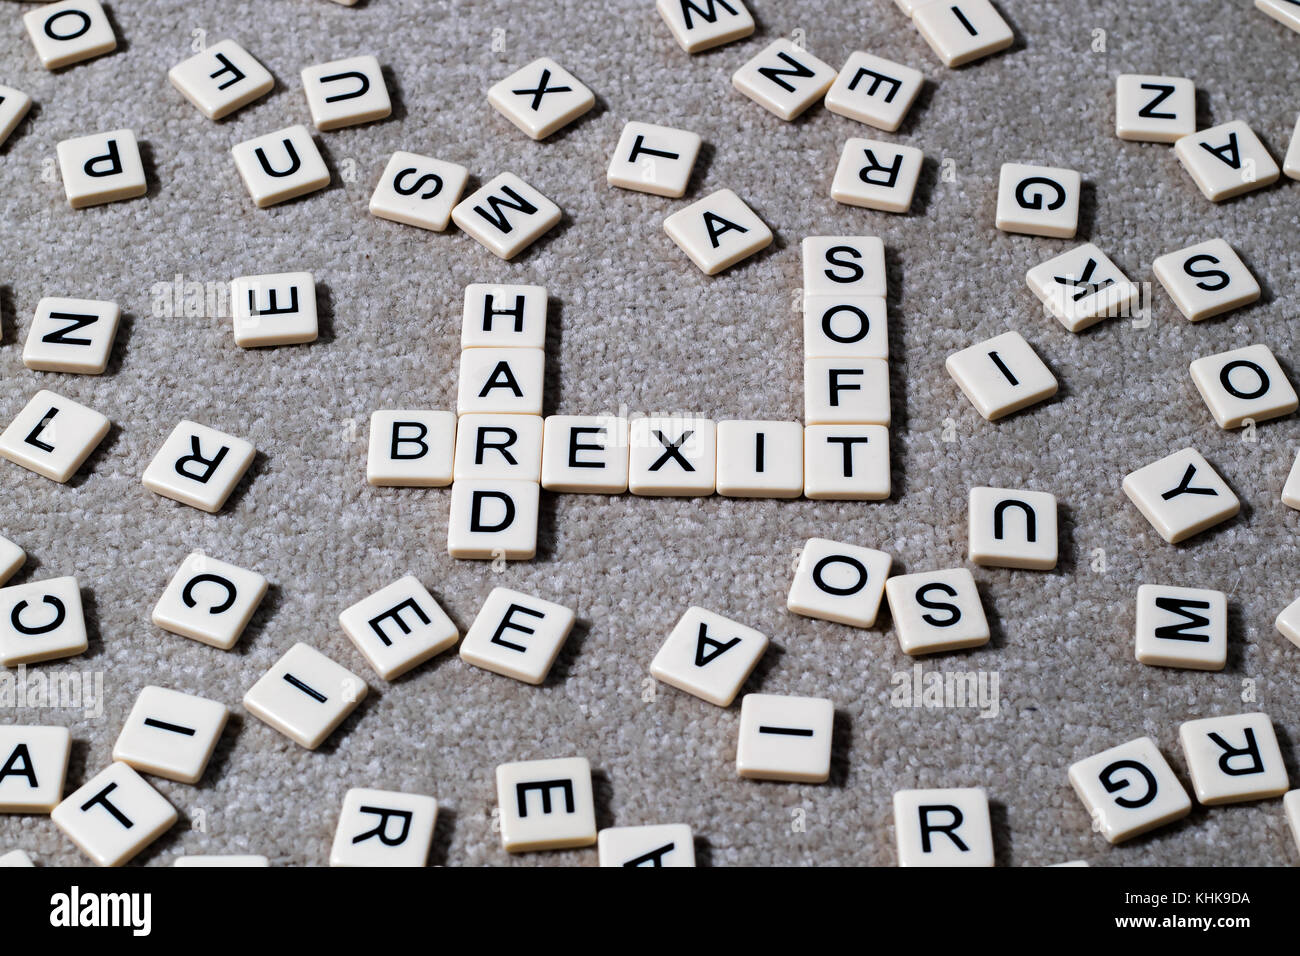 Hard Brexit & Soft Brexit spelled out on scrabble style lettered tiles amongst a jumble of other letters. Stock Photo